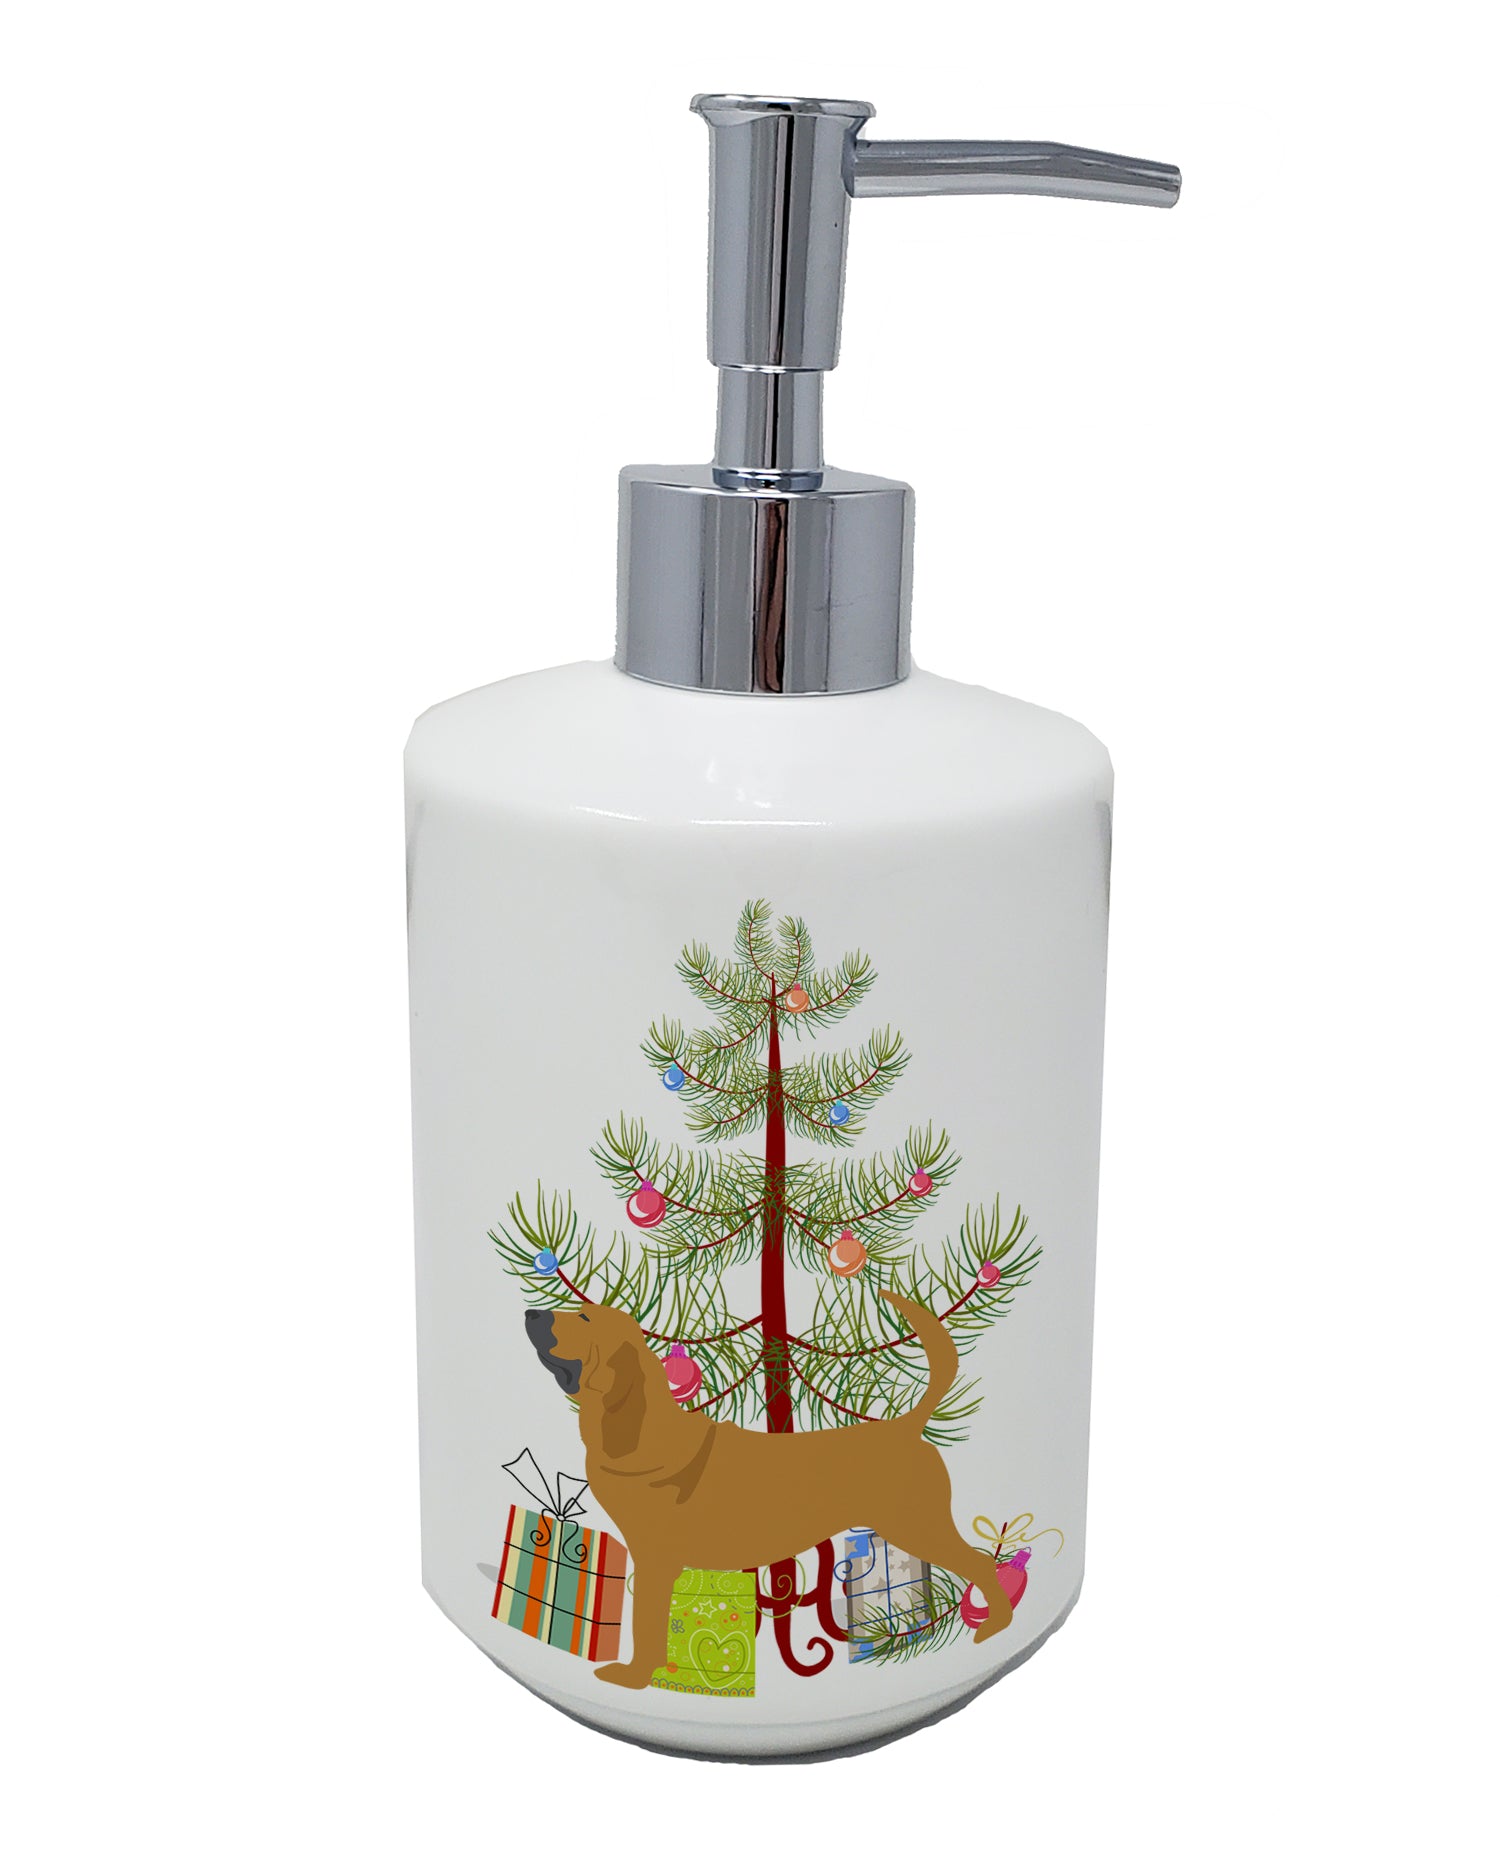 Buy this Bloodhound Merry Christmas Tree Ceramic Soap Dispenser